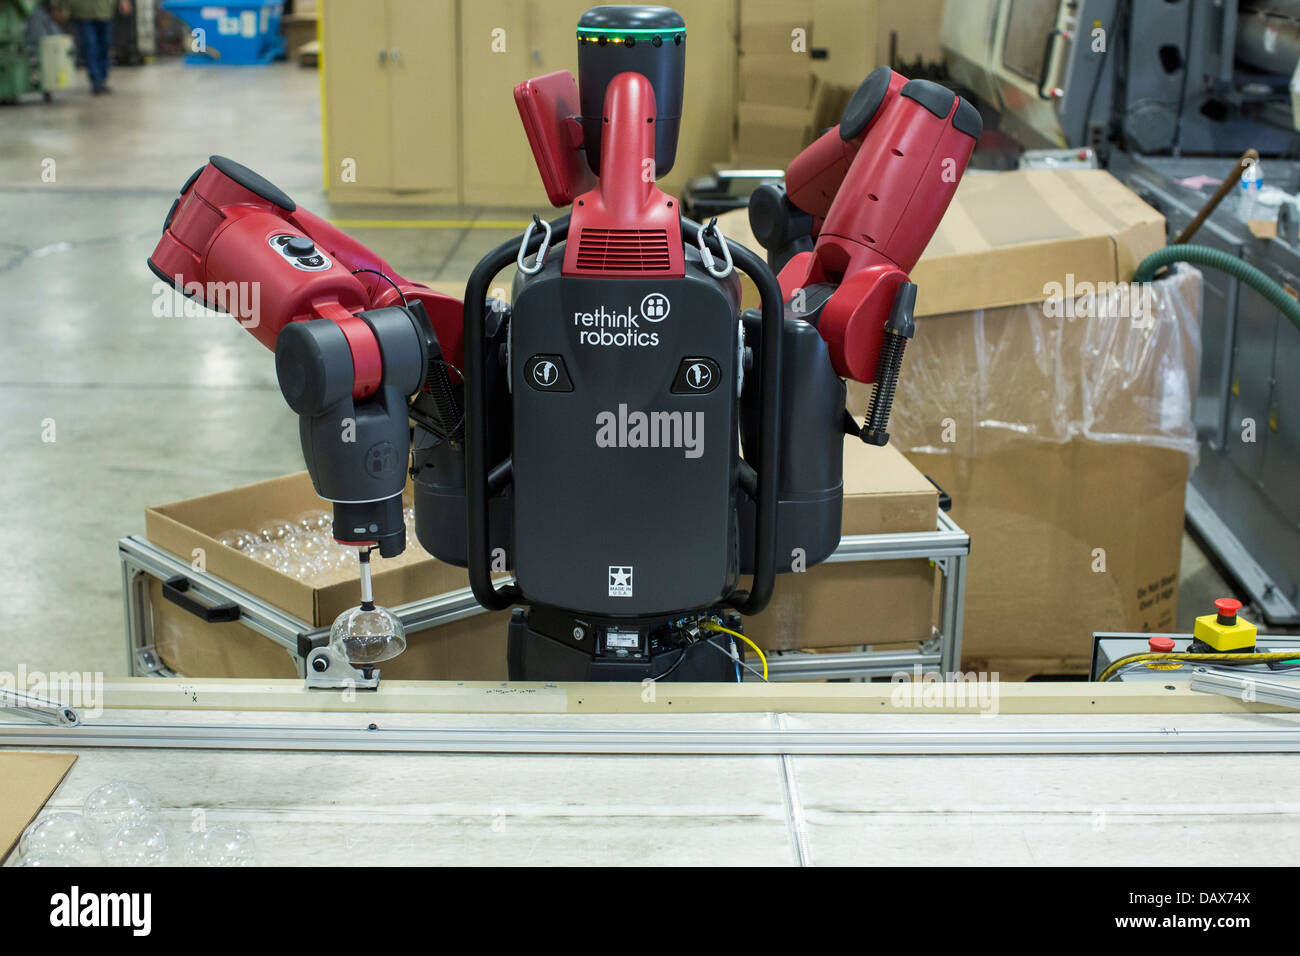 Baxter the robot made by Rethink Robotics at the Rodon Group plastic molding factory.  Stock Photo